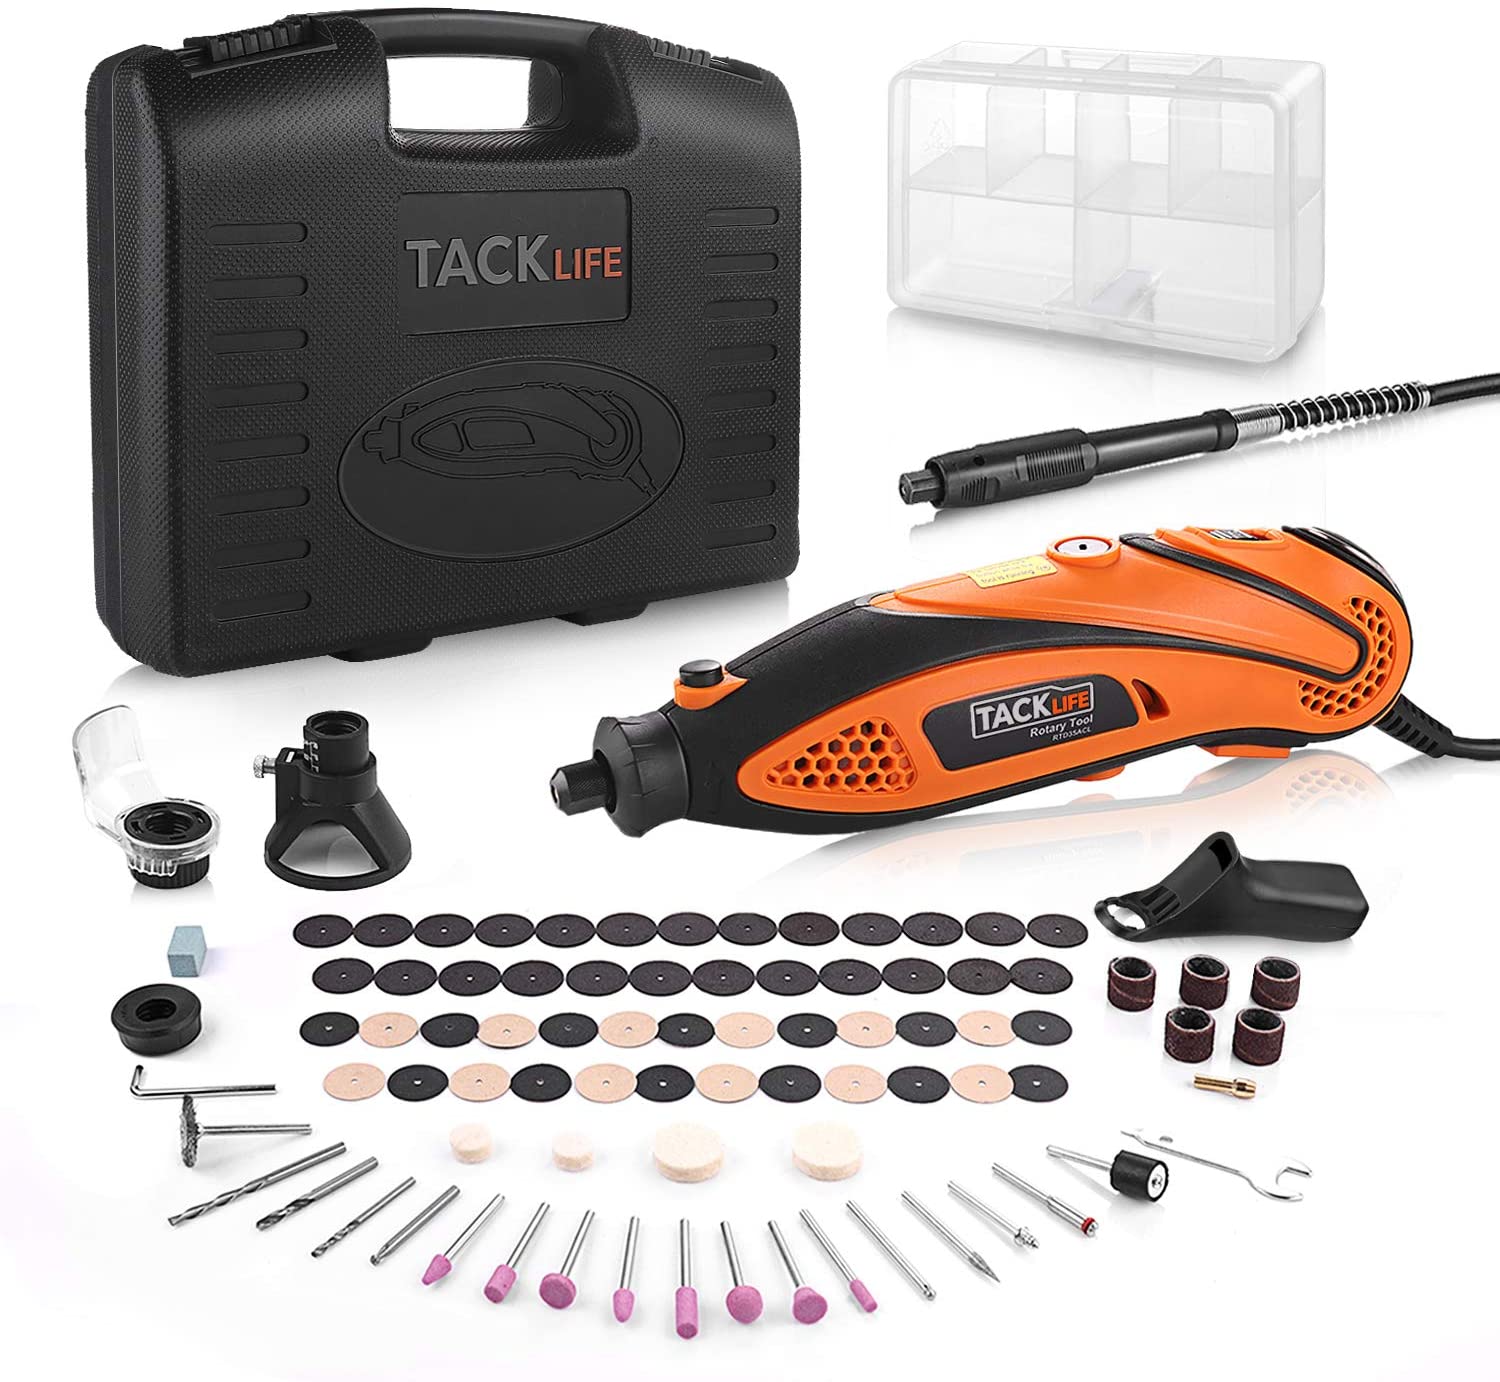 TACKLIFE RTD35ACL Variable Speed With Flex Shaft Rotary Tool Kit, 80-Pieces